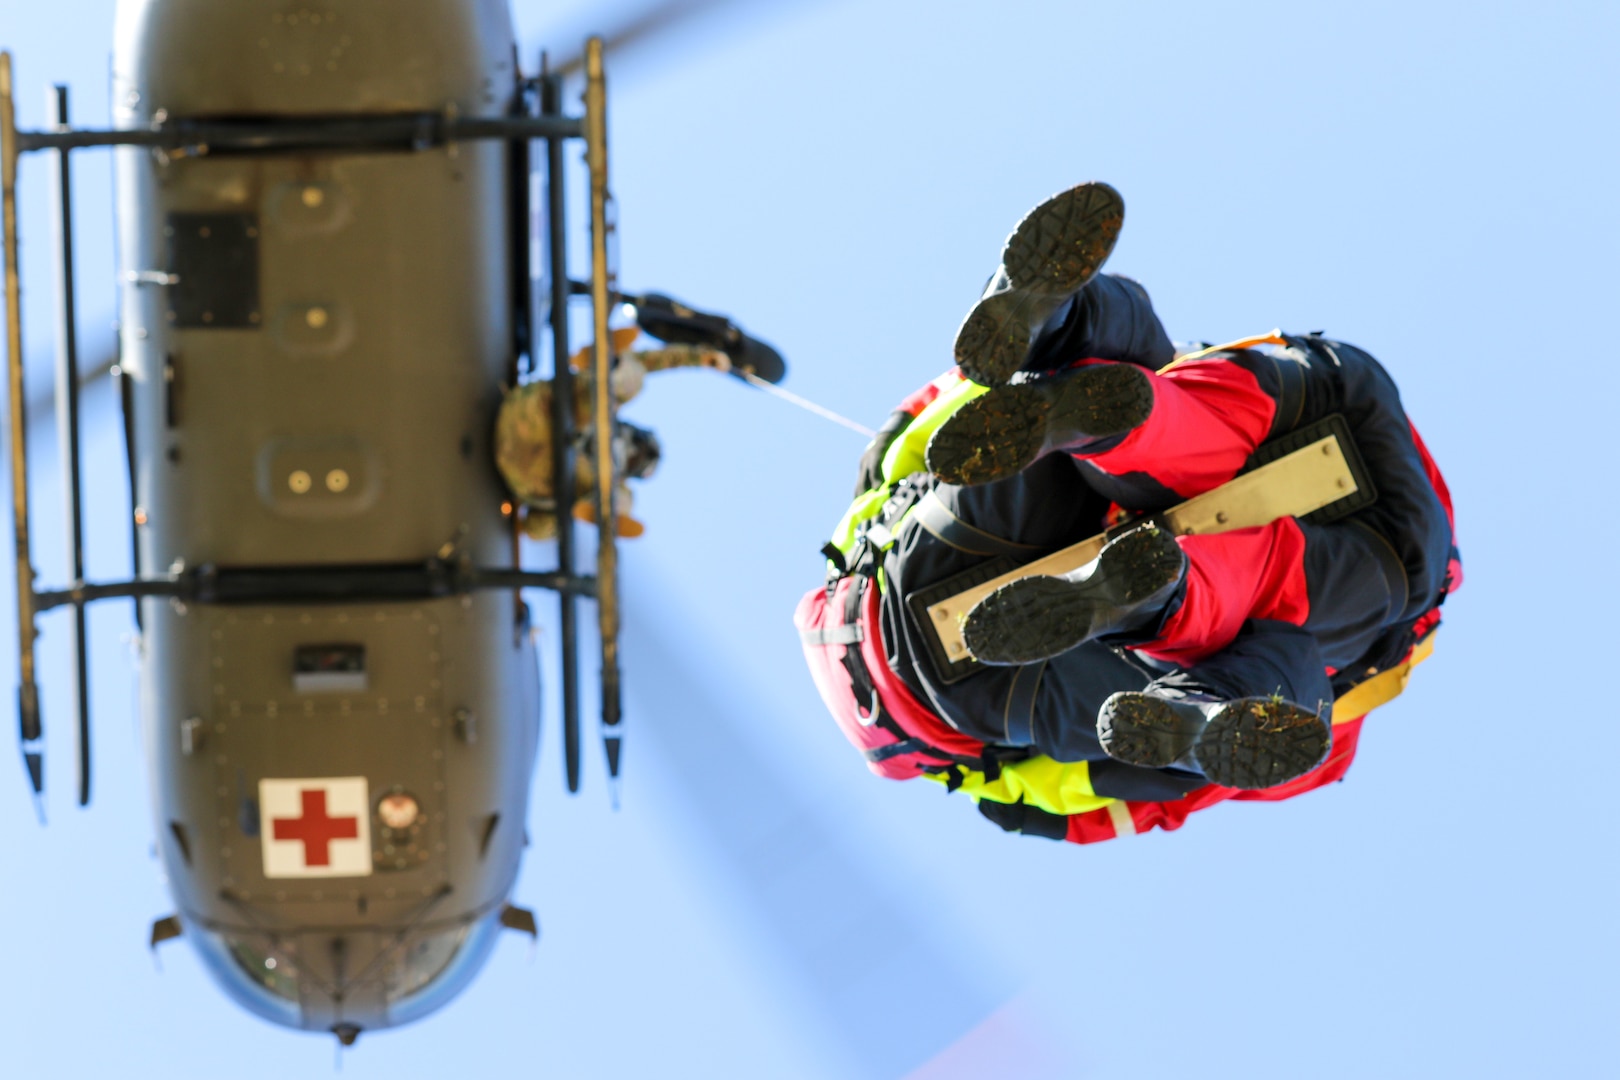 Firefighters with Mississippi Task Force Urban Search and
Rescue ride hoist to UH-72 Lakota while participating in Patriot
South 20, at Guardian Centers in Perry, Georgia, February 28,
2020 (U.S. Army National Guard/Christopher Shannon)